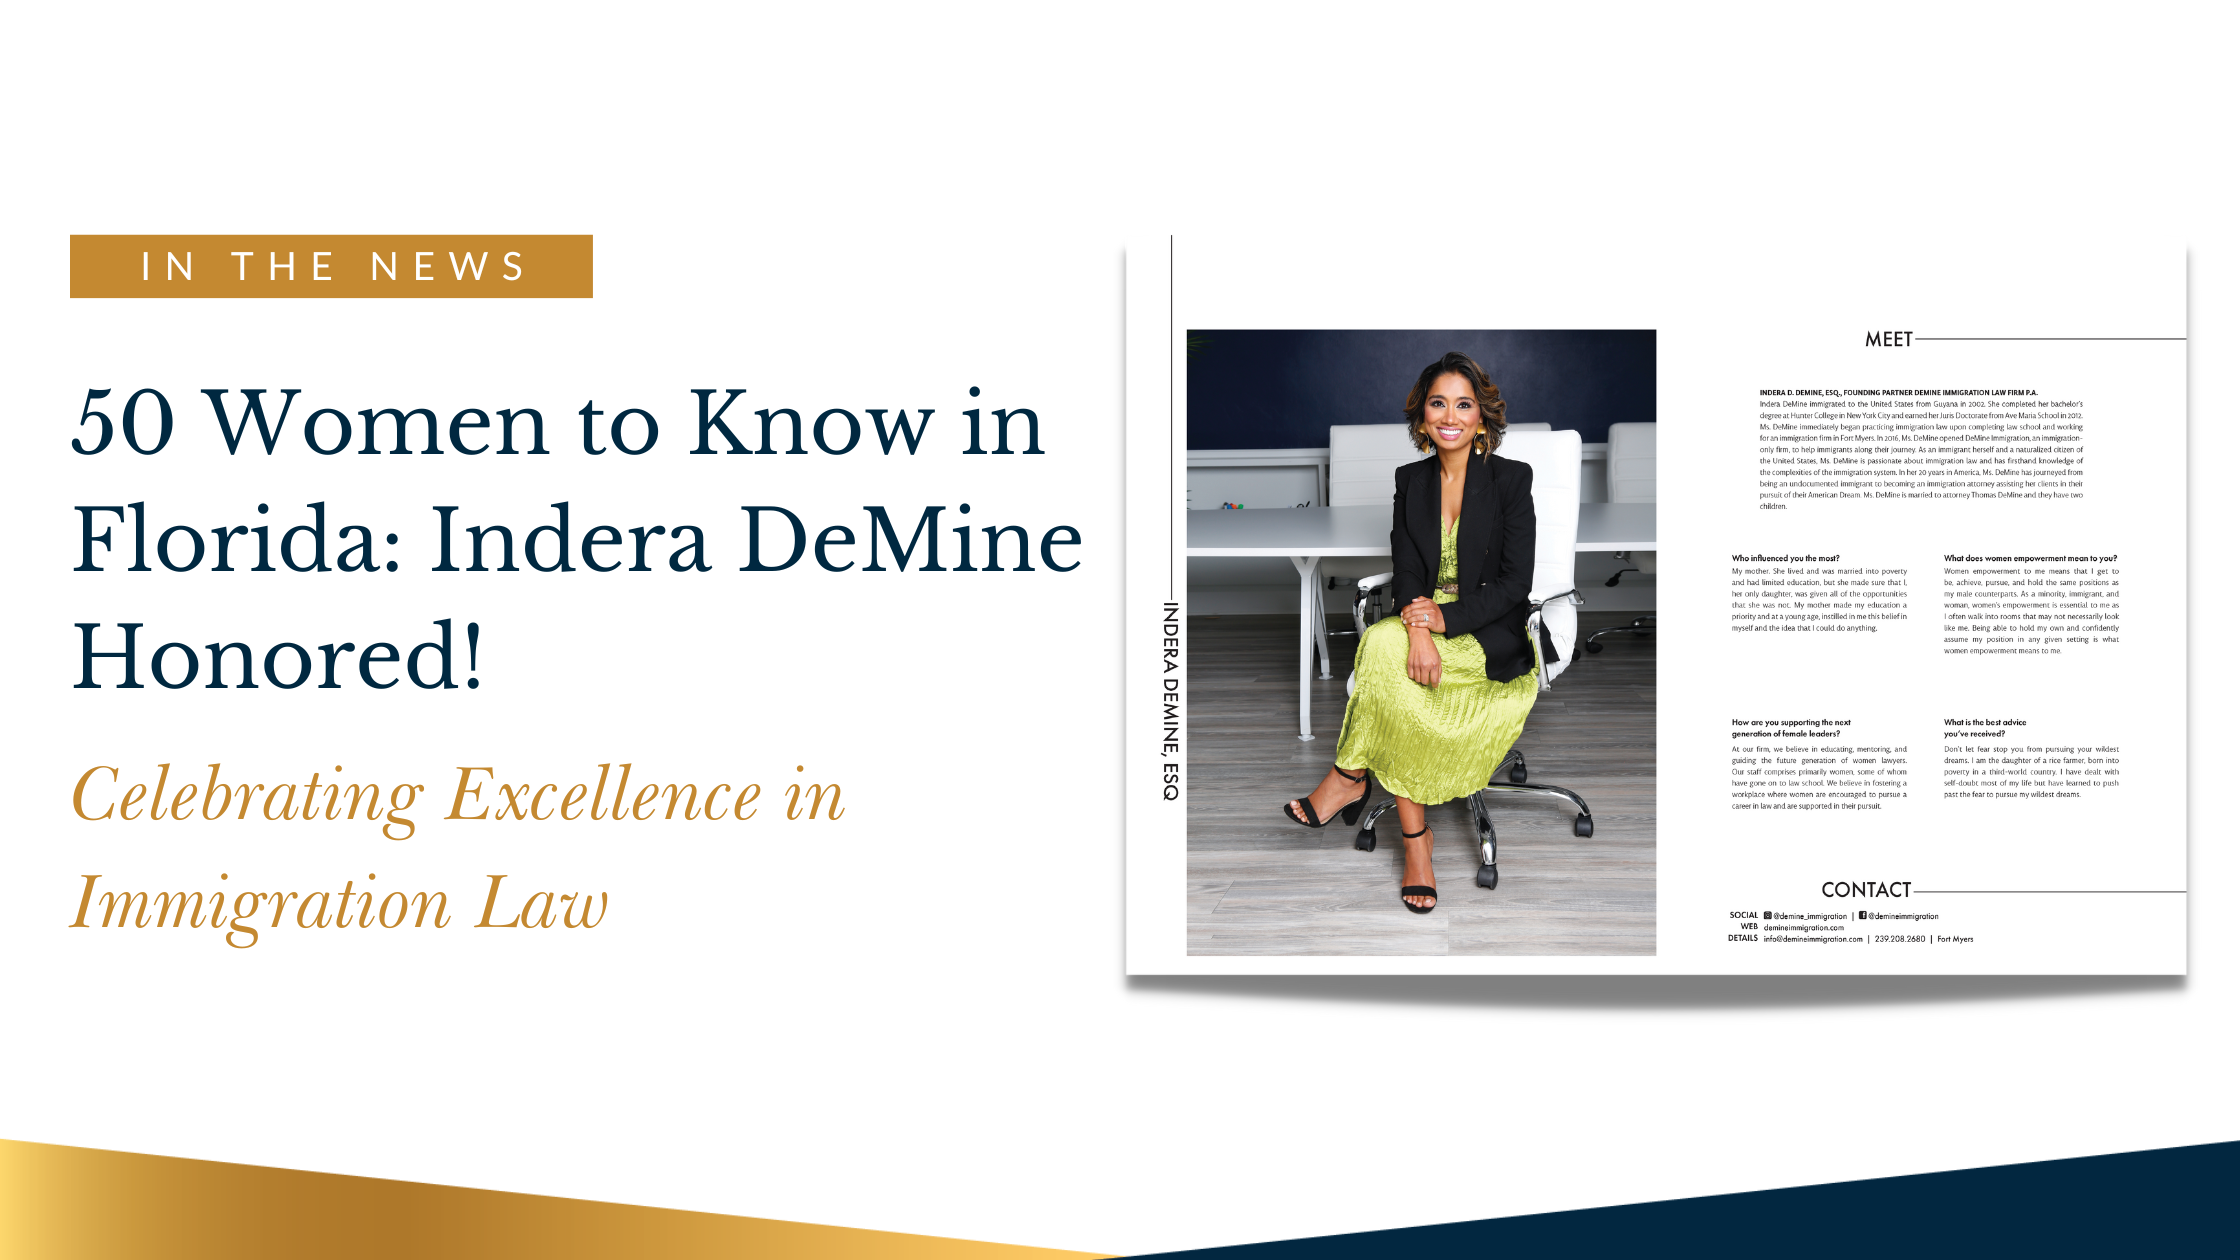 Celebrating Our Founder: Indera DeMine in '50 Women to Know in Florida